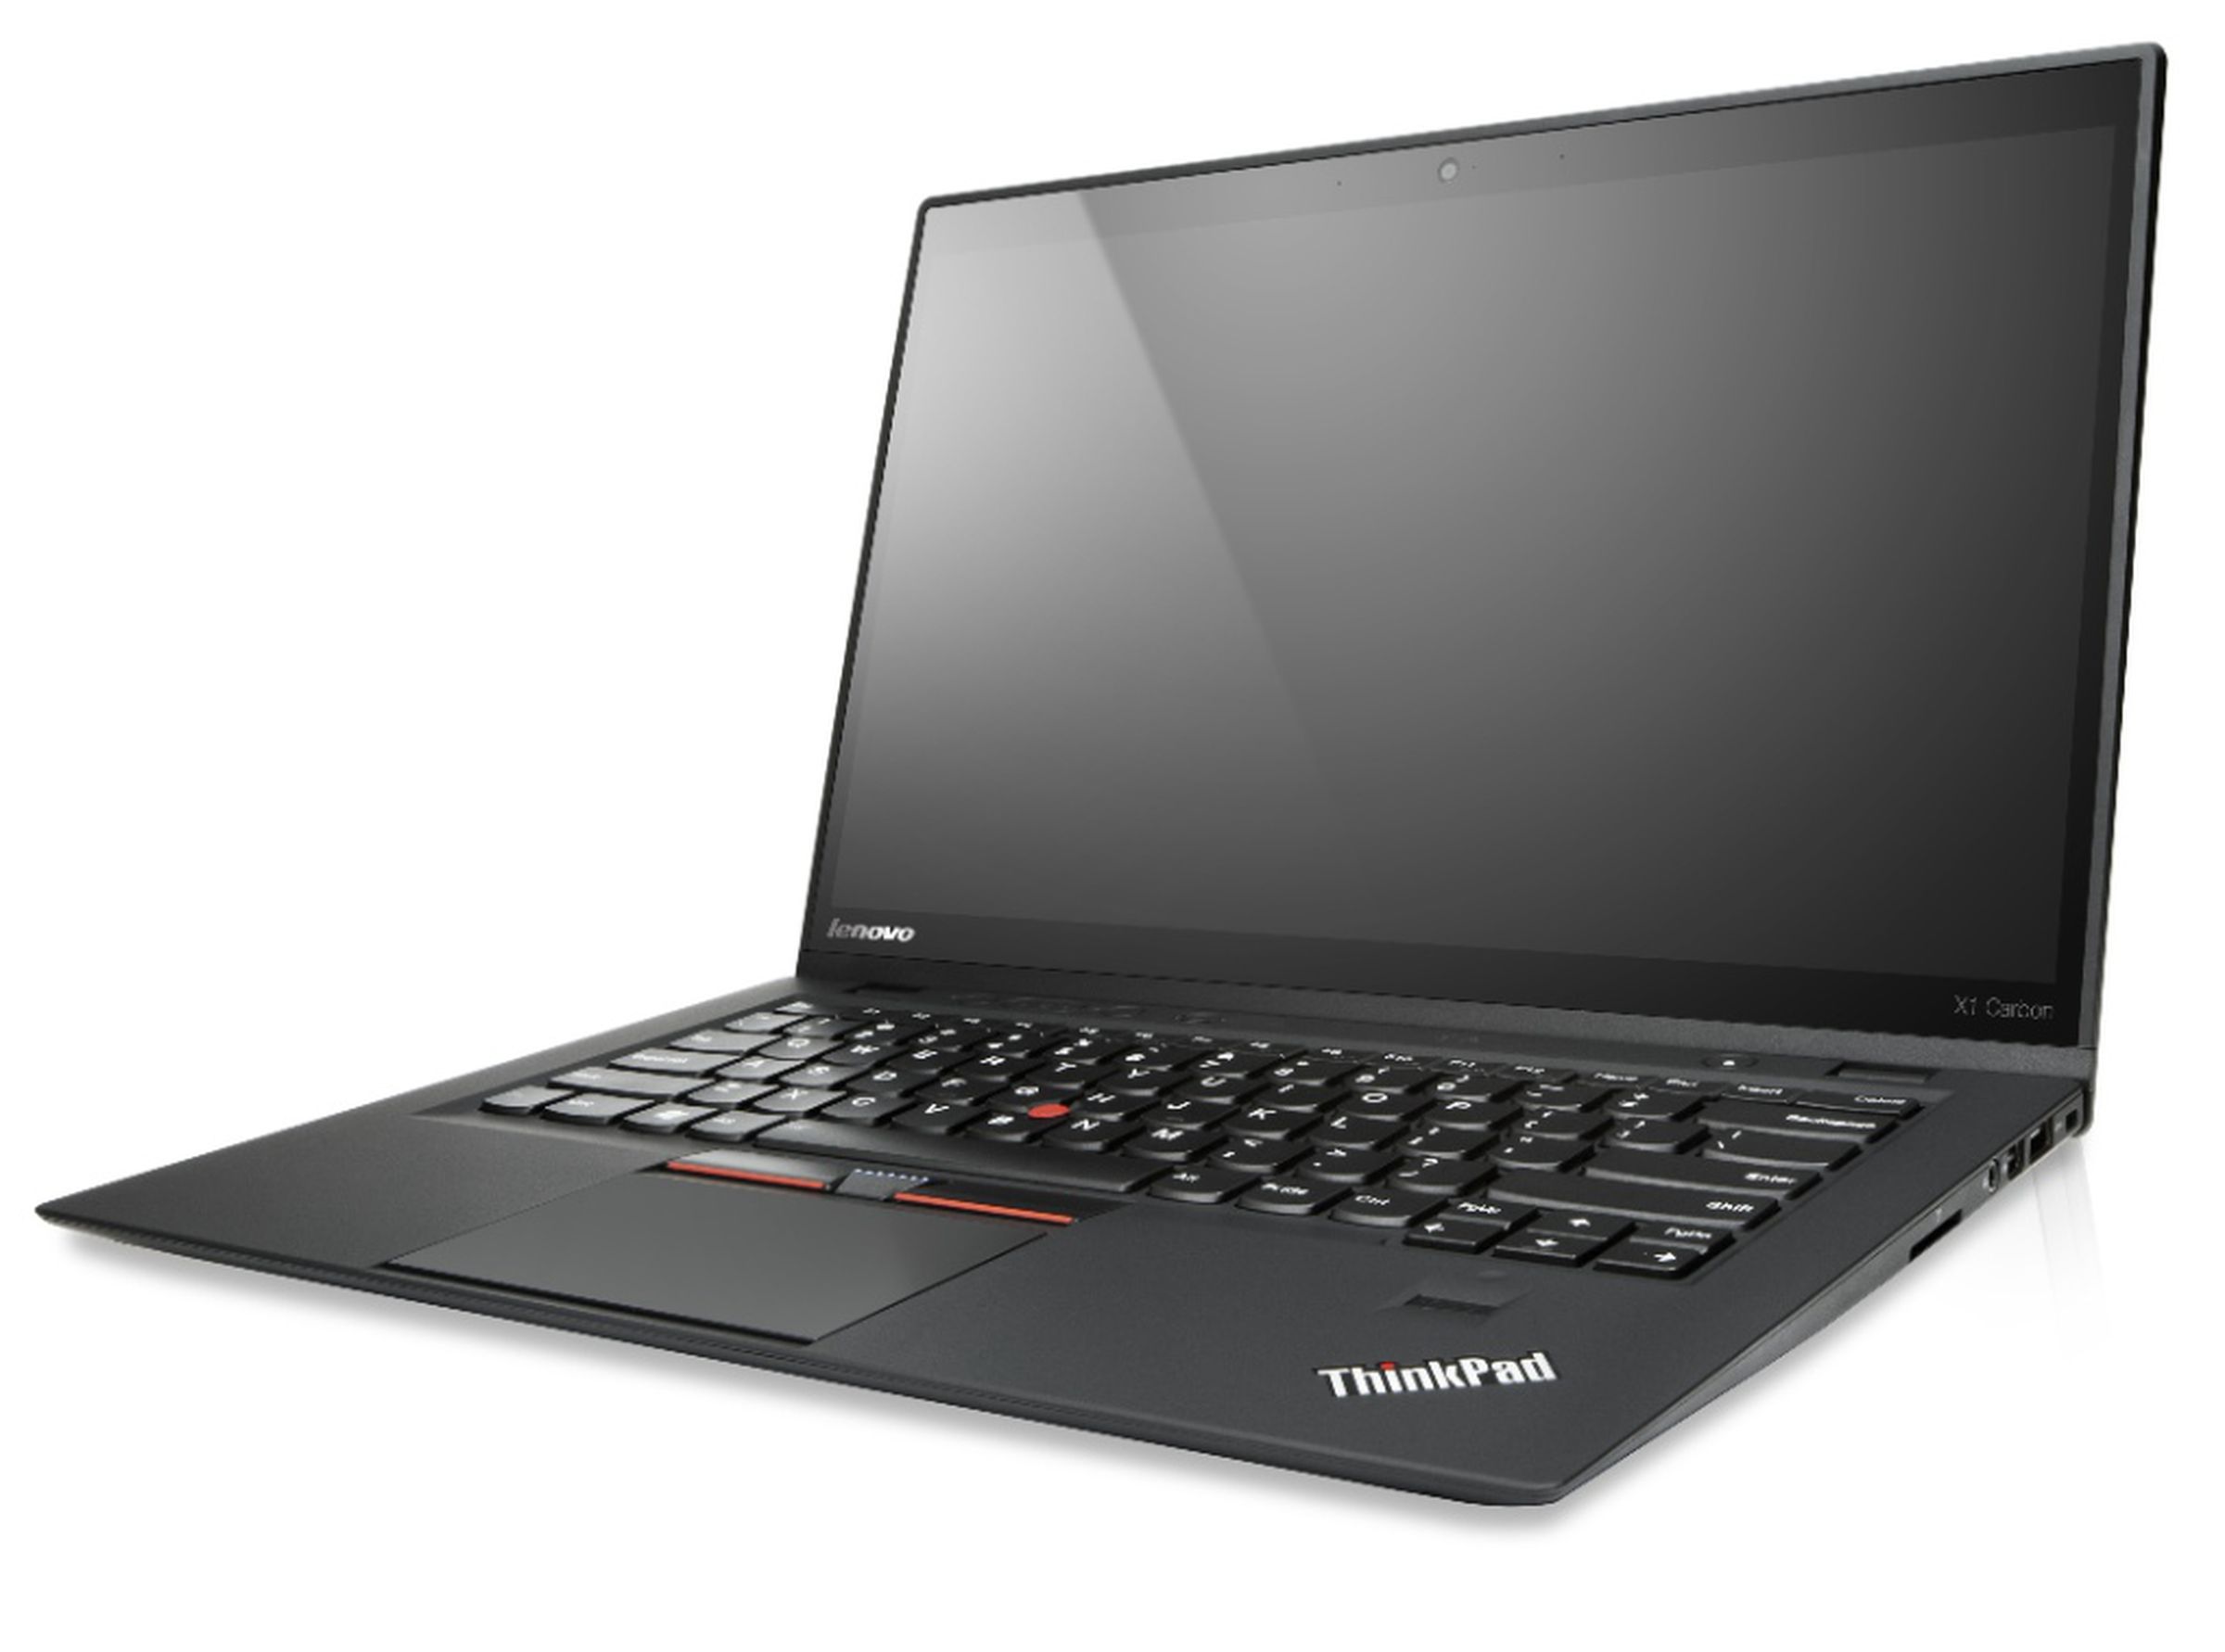 Lenovo ThinkPad X1 Carbon Touch press images